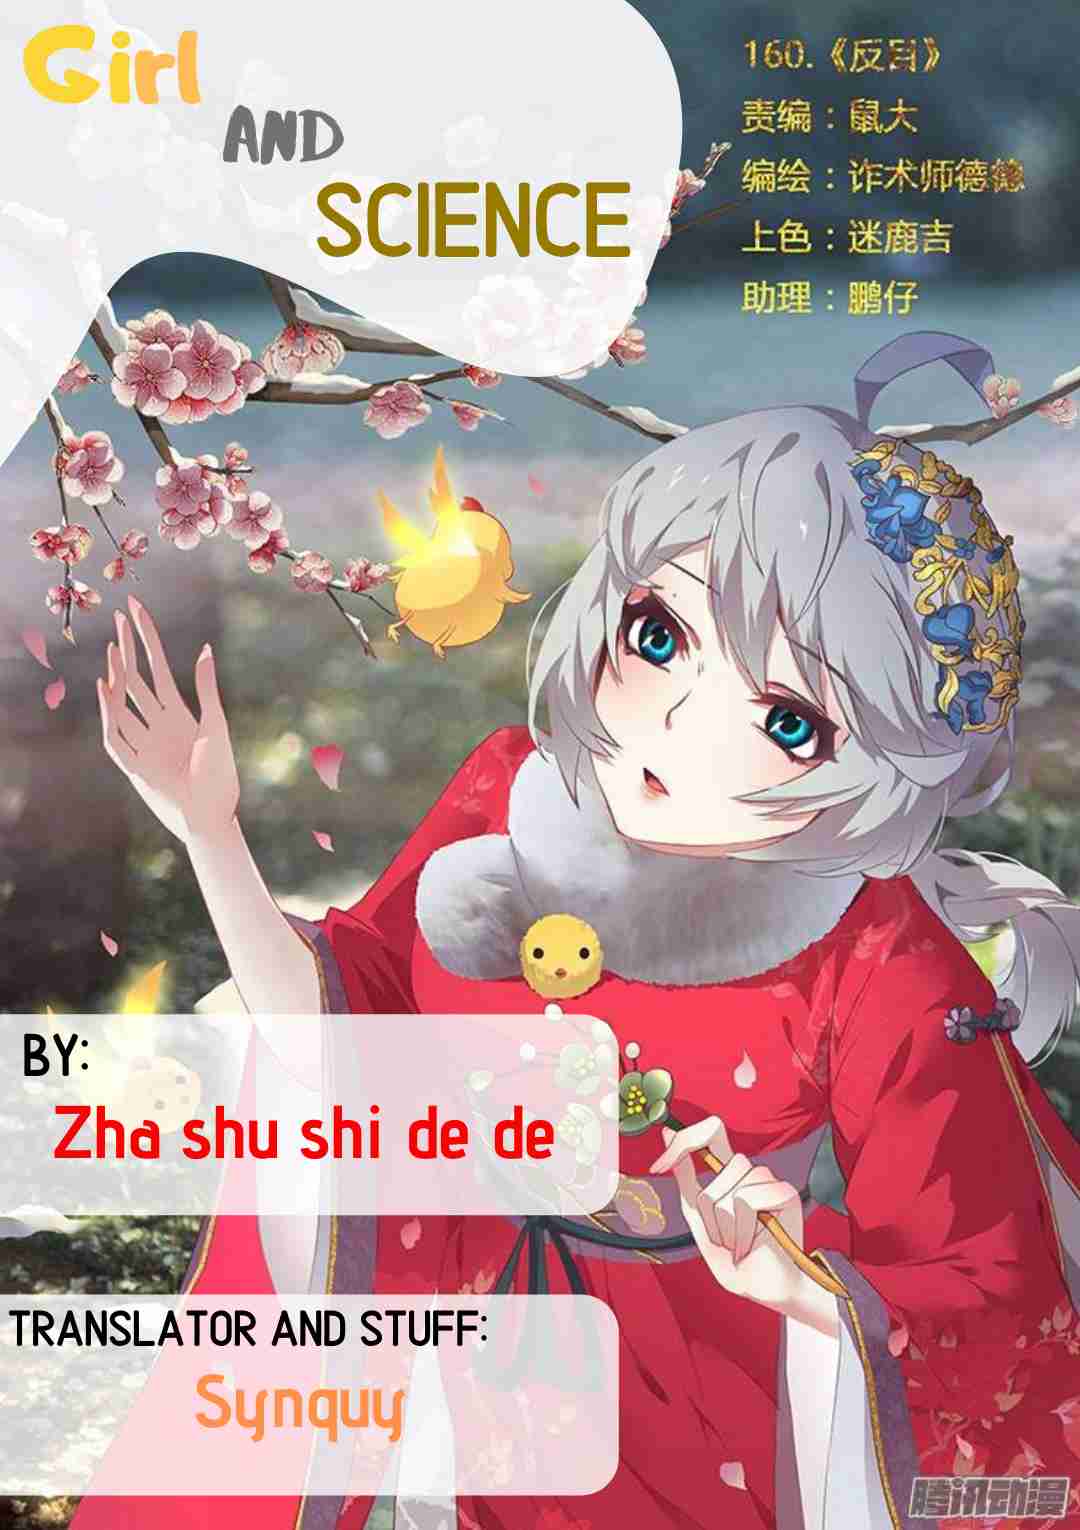 Girl and Science Vol. 1 Ch. 54 You won't be able to run away this time!